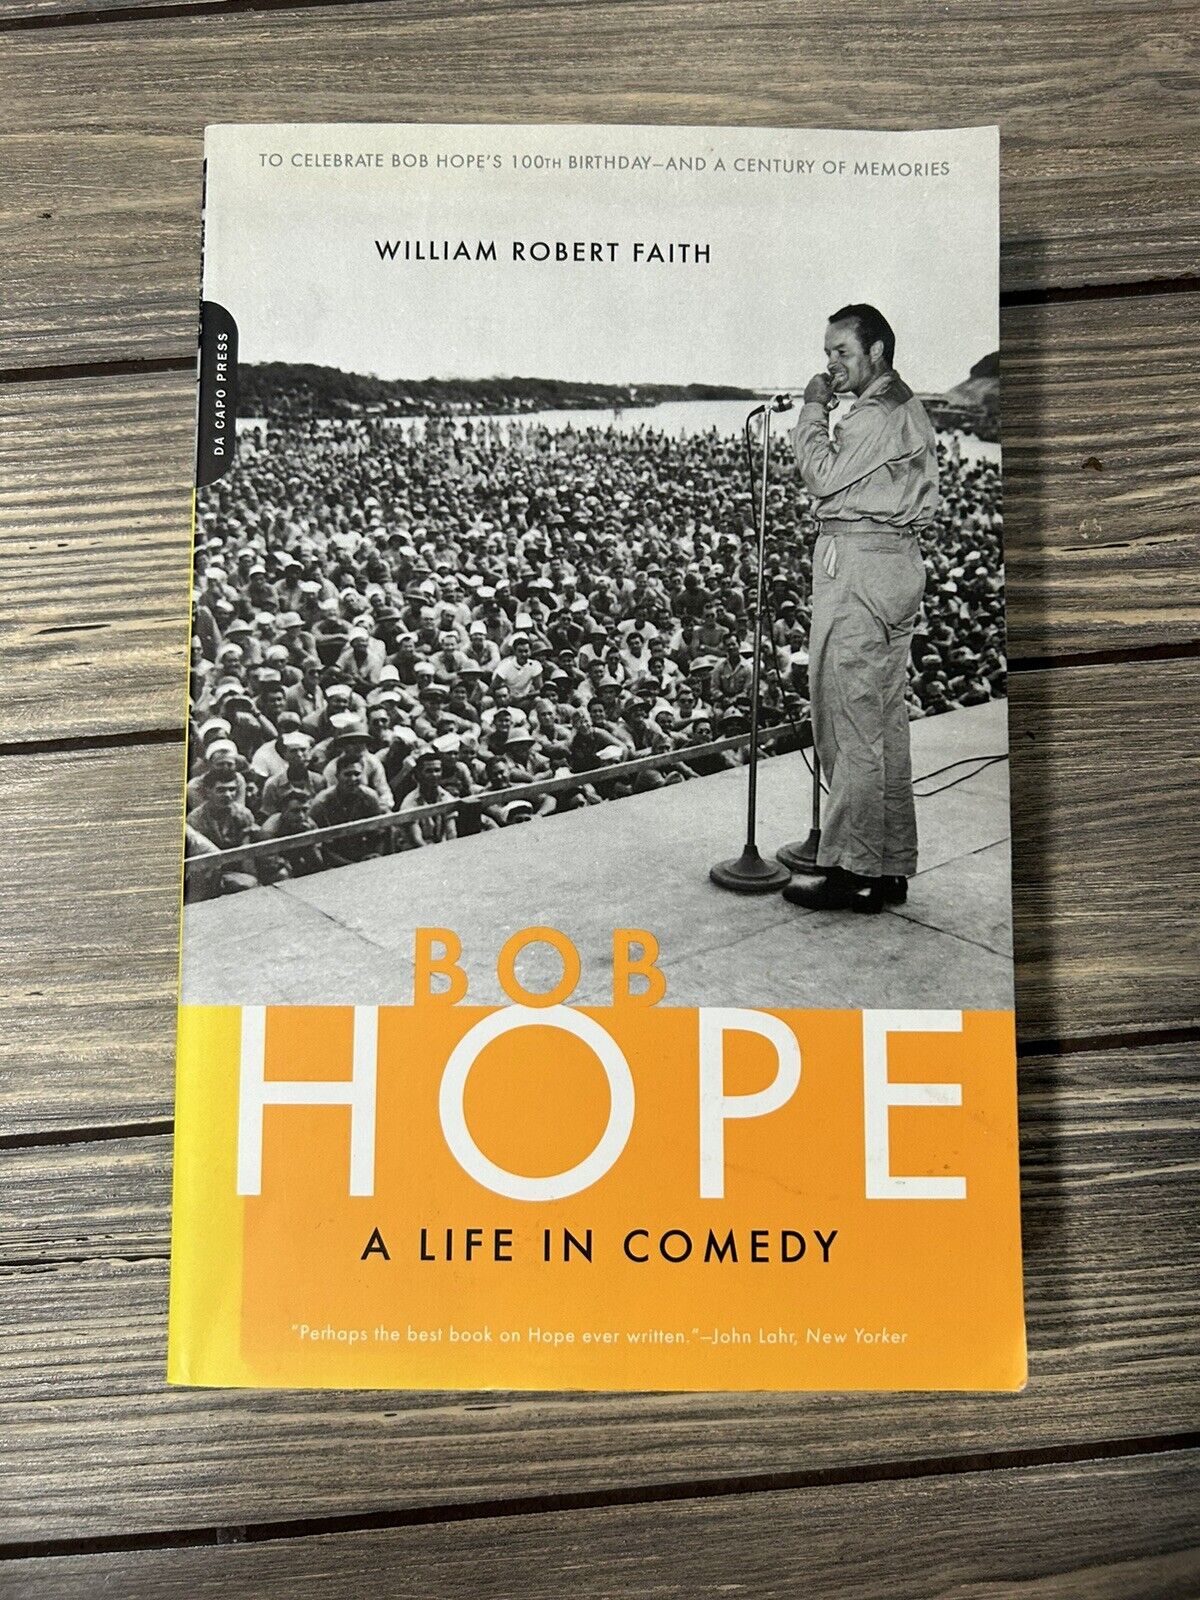 Vtg 2003 Bob Hope A Life In Comedy Paperback Book William Robert Faith Signed